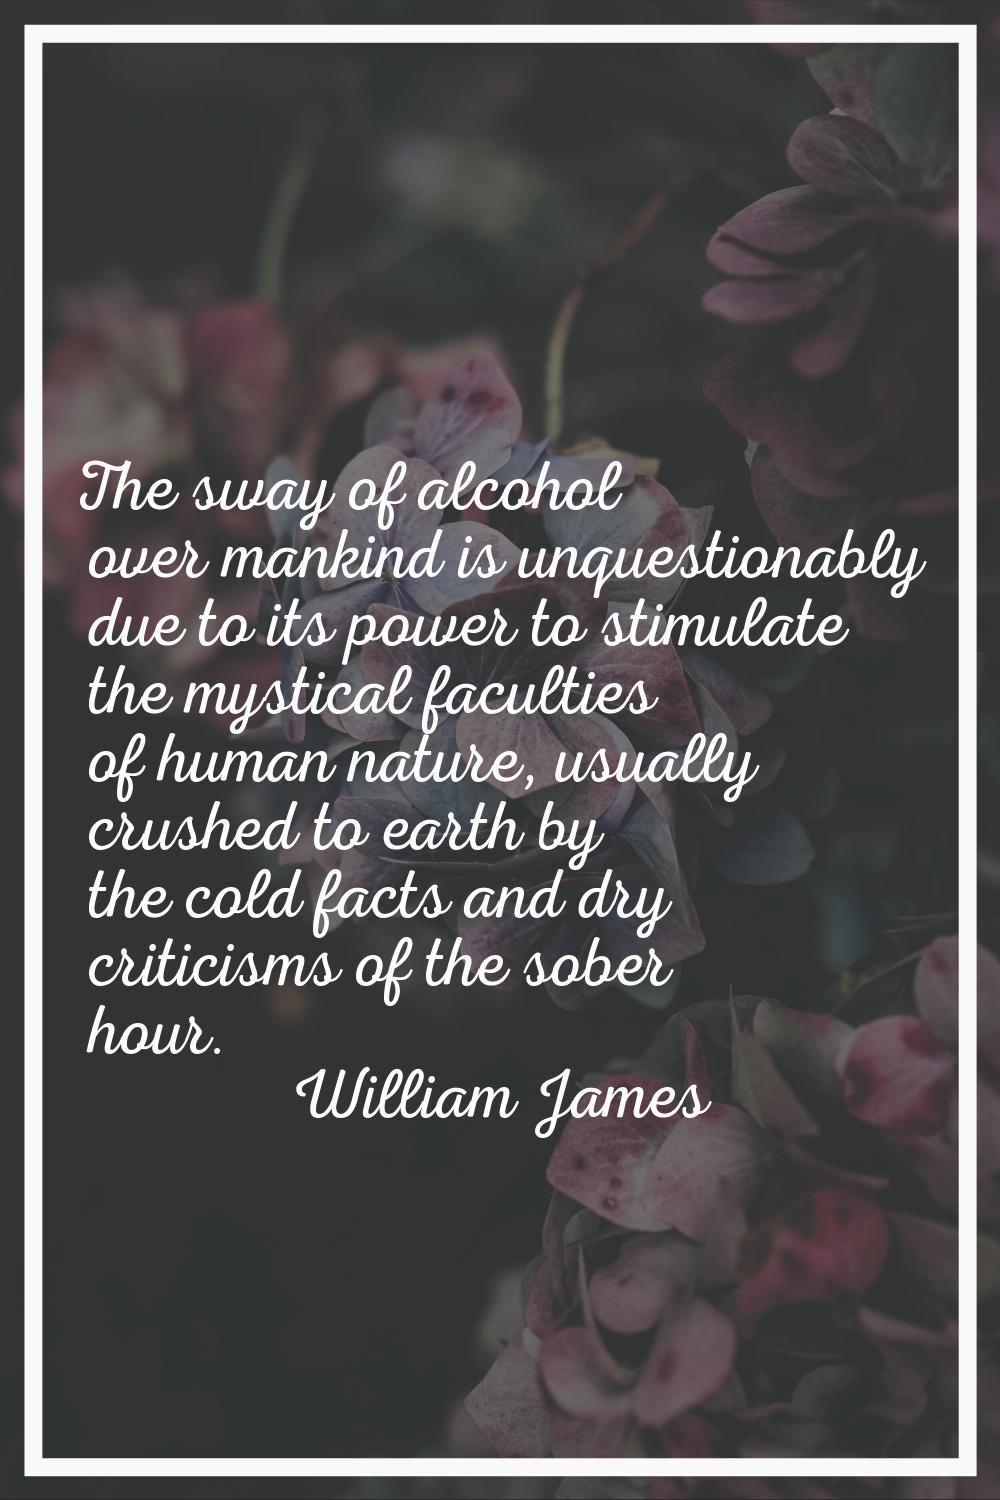 The sway of alcohol over mankind is unquestionably due to its power to stimulate the mystical facul